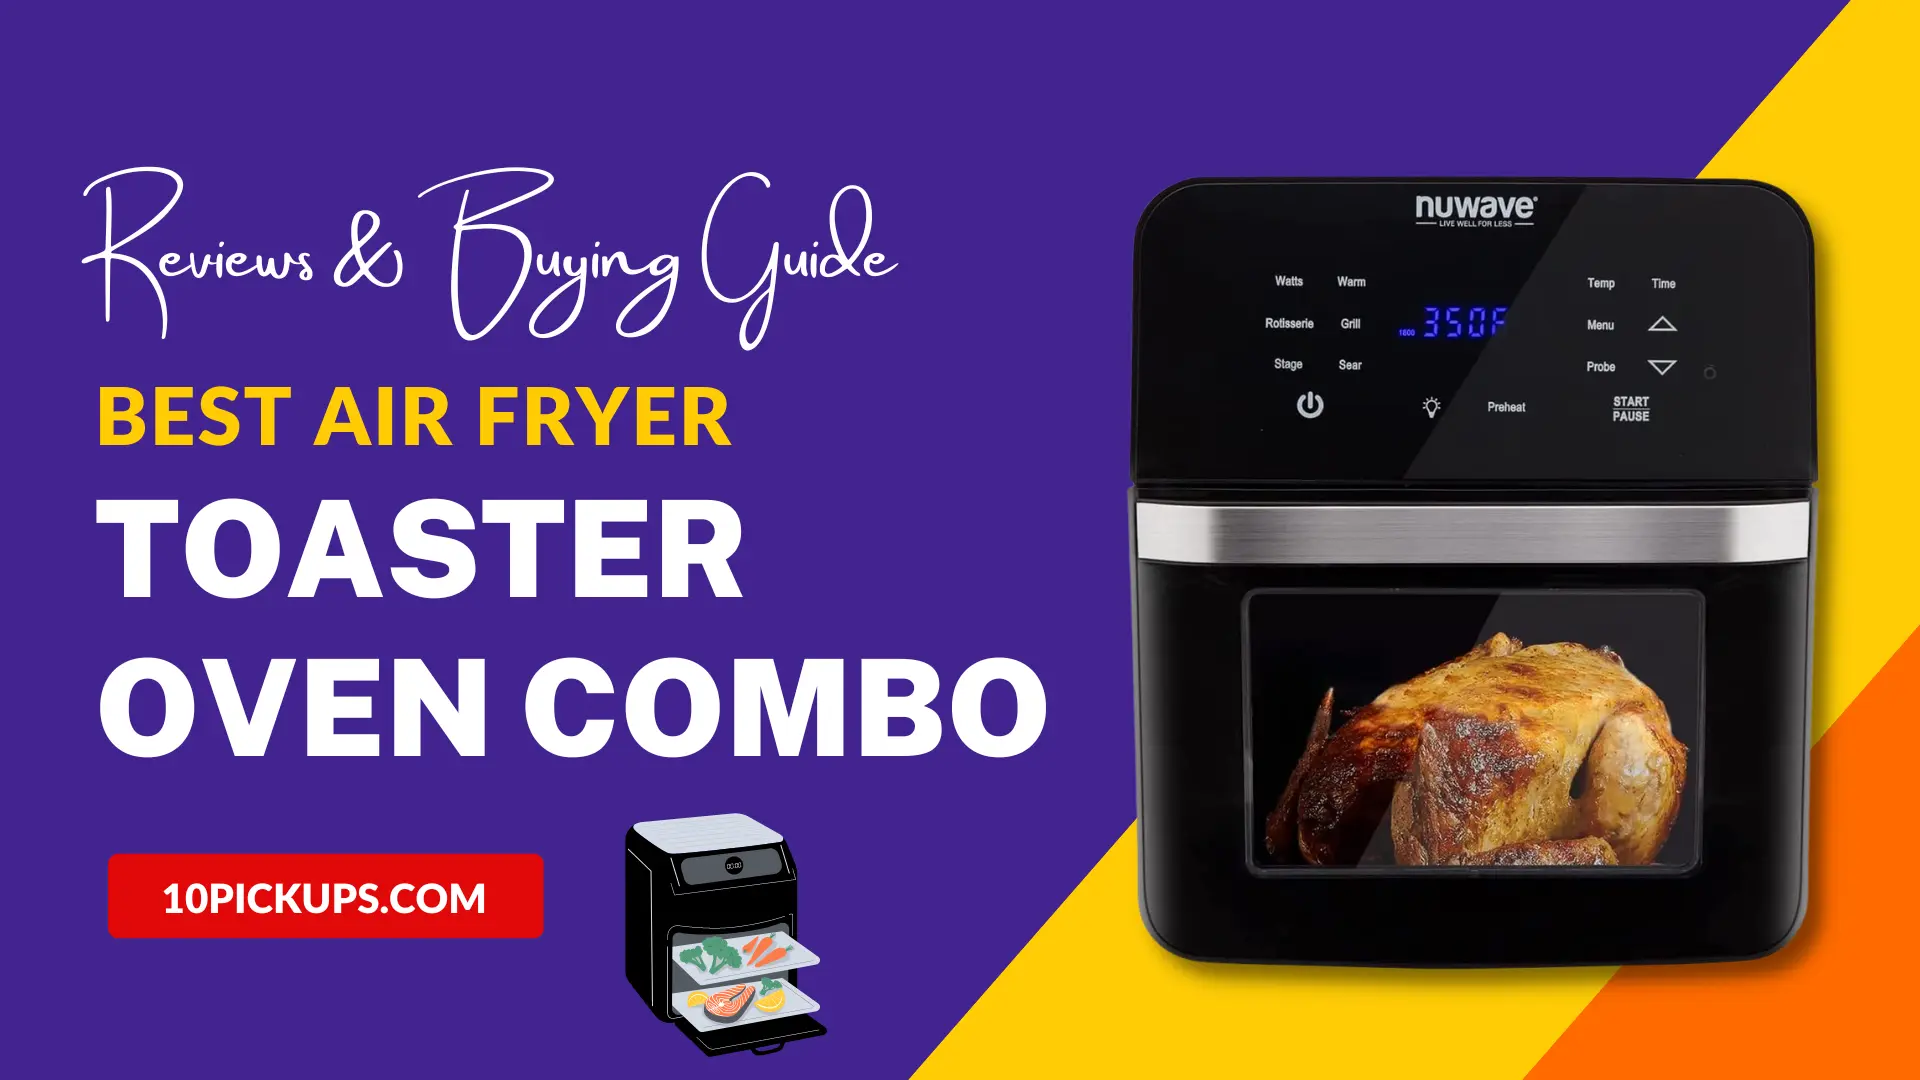 The 7 Best Air Fryer Toaster Oven Combo to Buy in 2023, According to Thousands of Kitchen pros